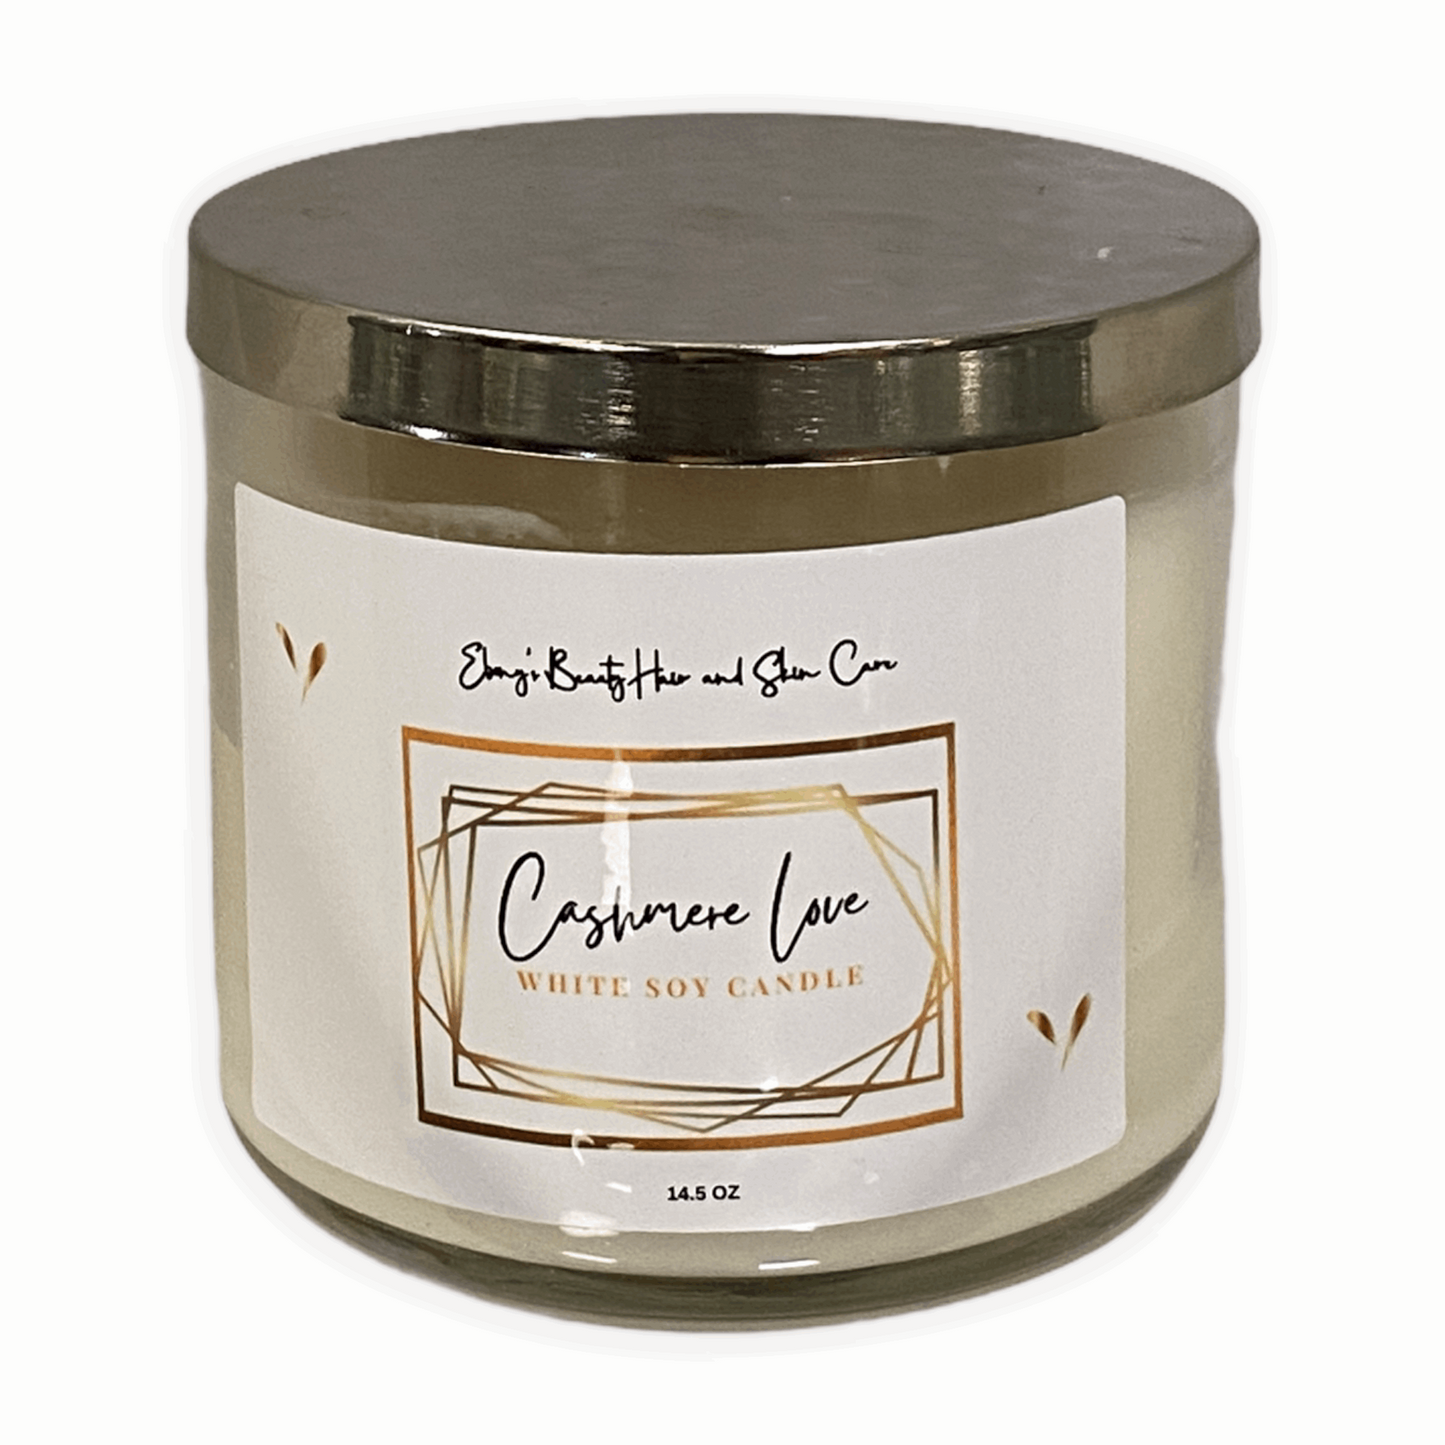 CASHMERE LOVE WHITE SOY CANDLE